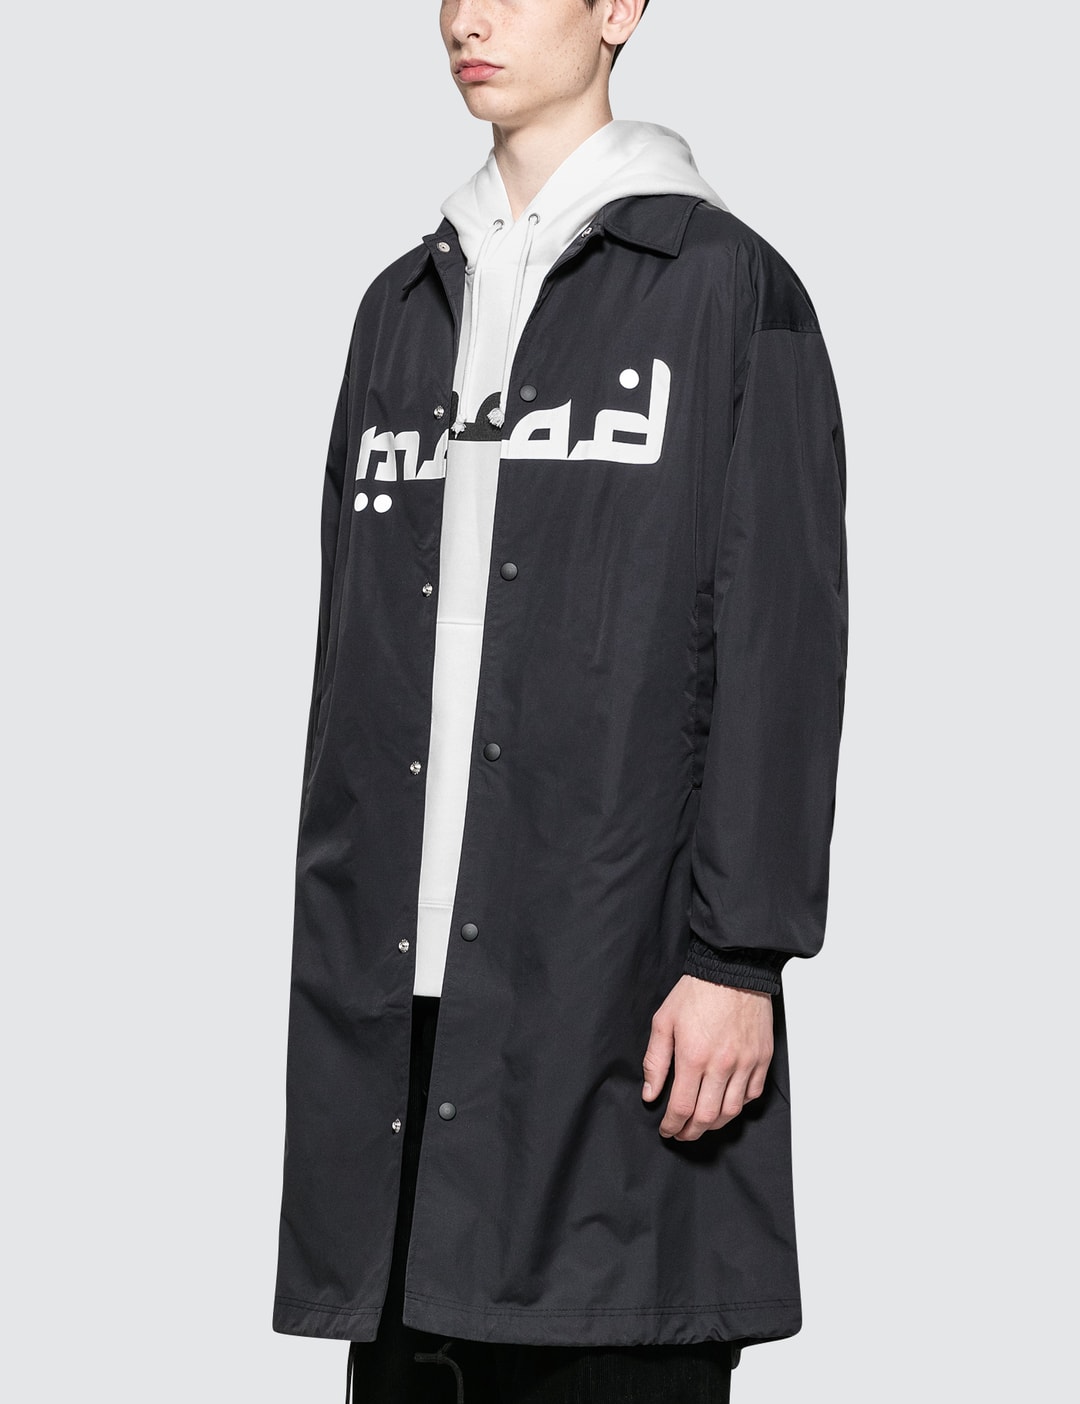 Undercover - Long Coach Jacket | HBX - Curated and Lifestyle Hypebeast